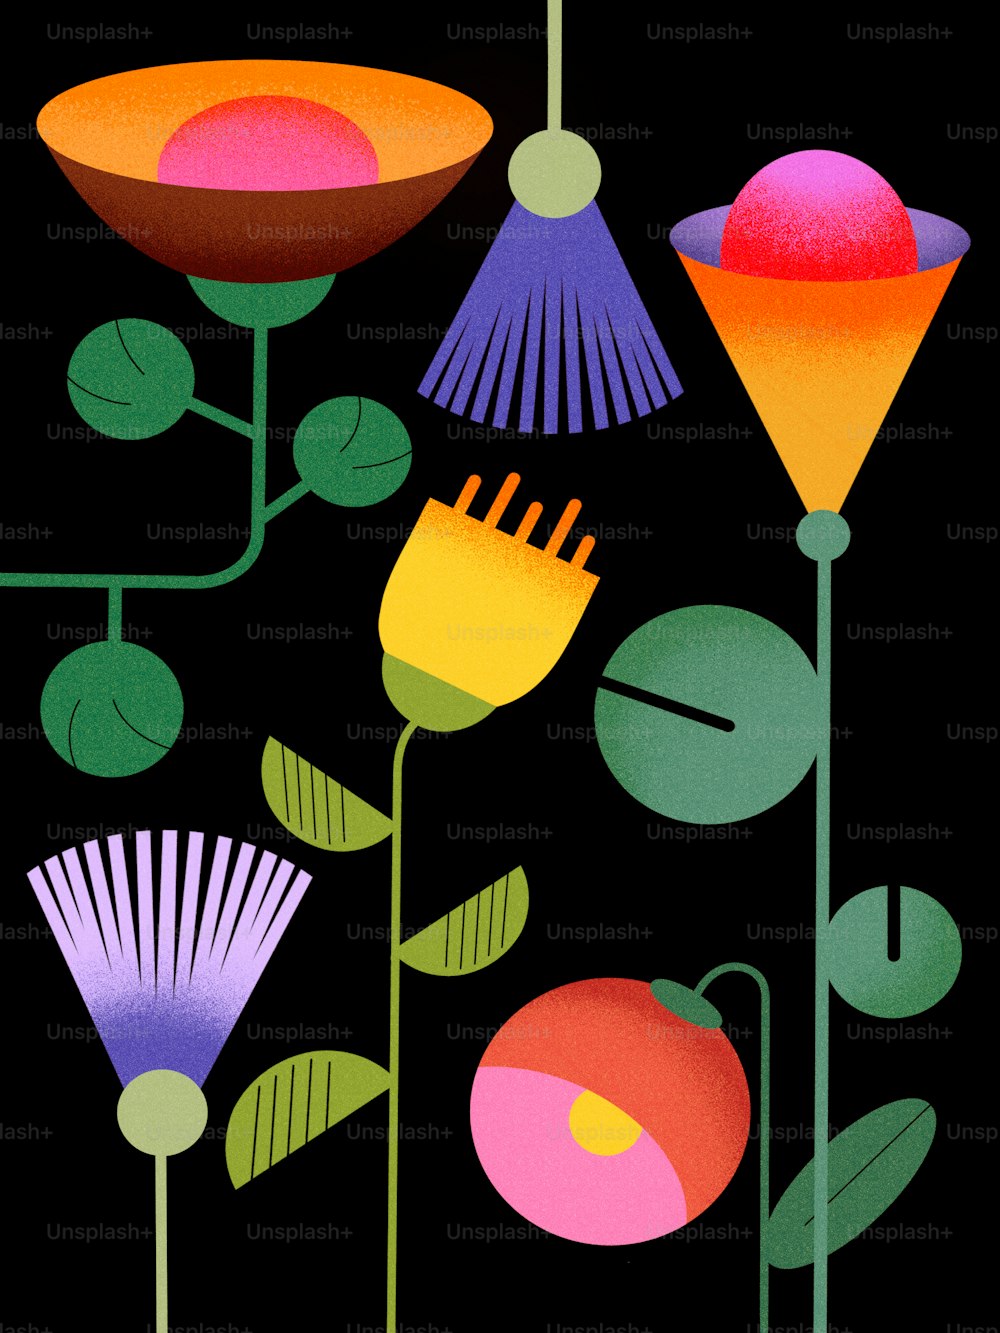 Web poster design of Flowers representing mother's day or summer solstice illustraiton